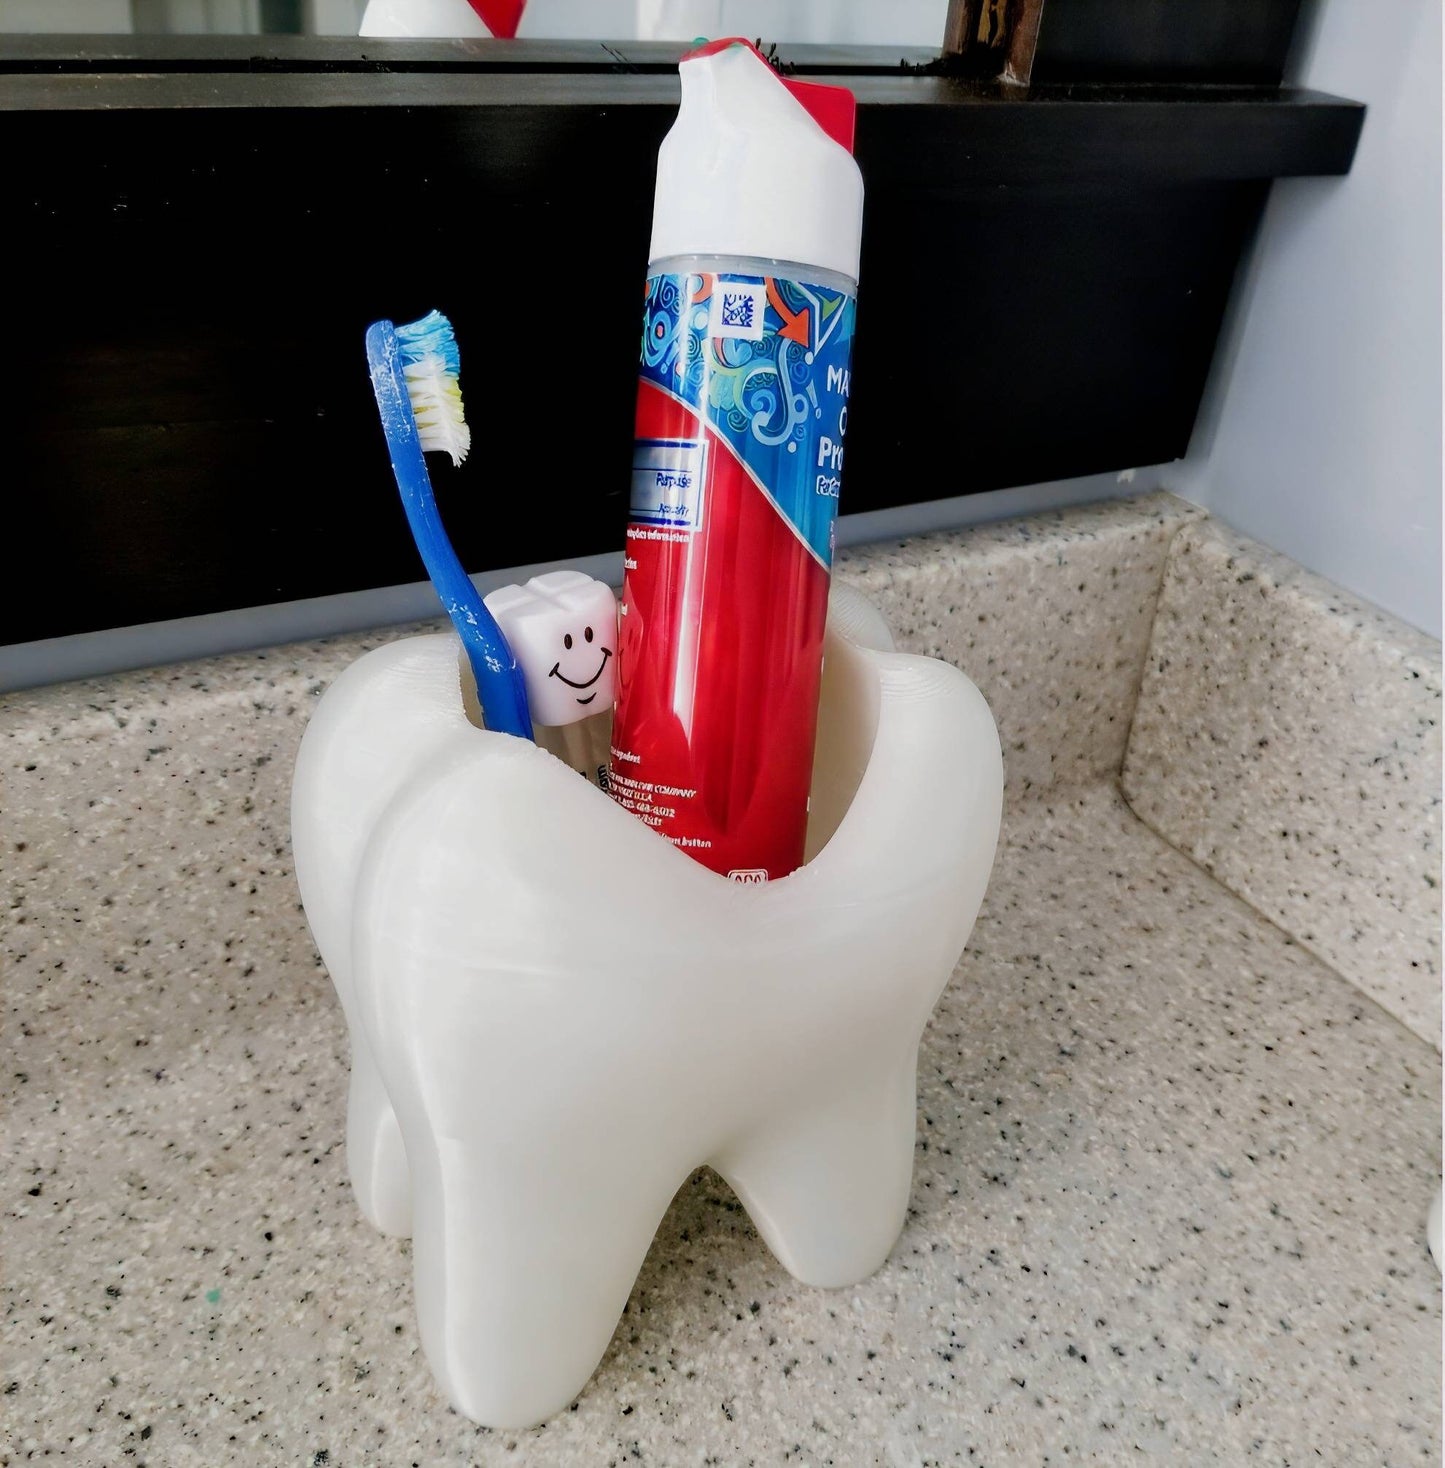 Tooth Shaped Cup for Toothbrush and Toothpaste Bathroom Decor